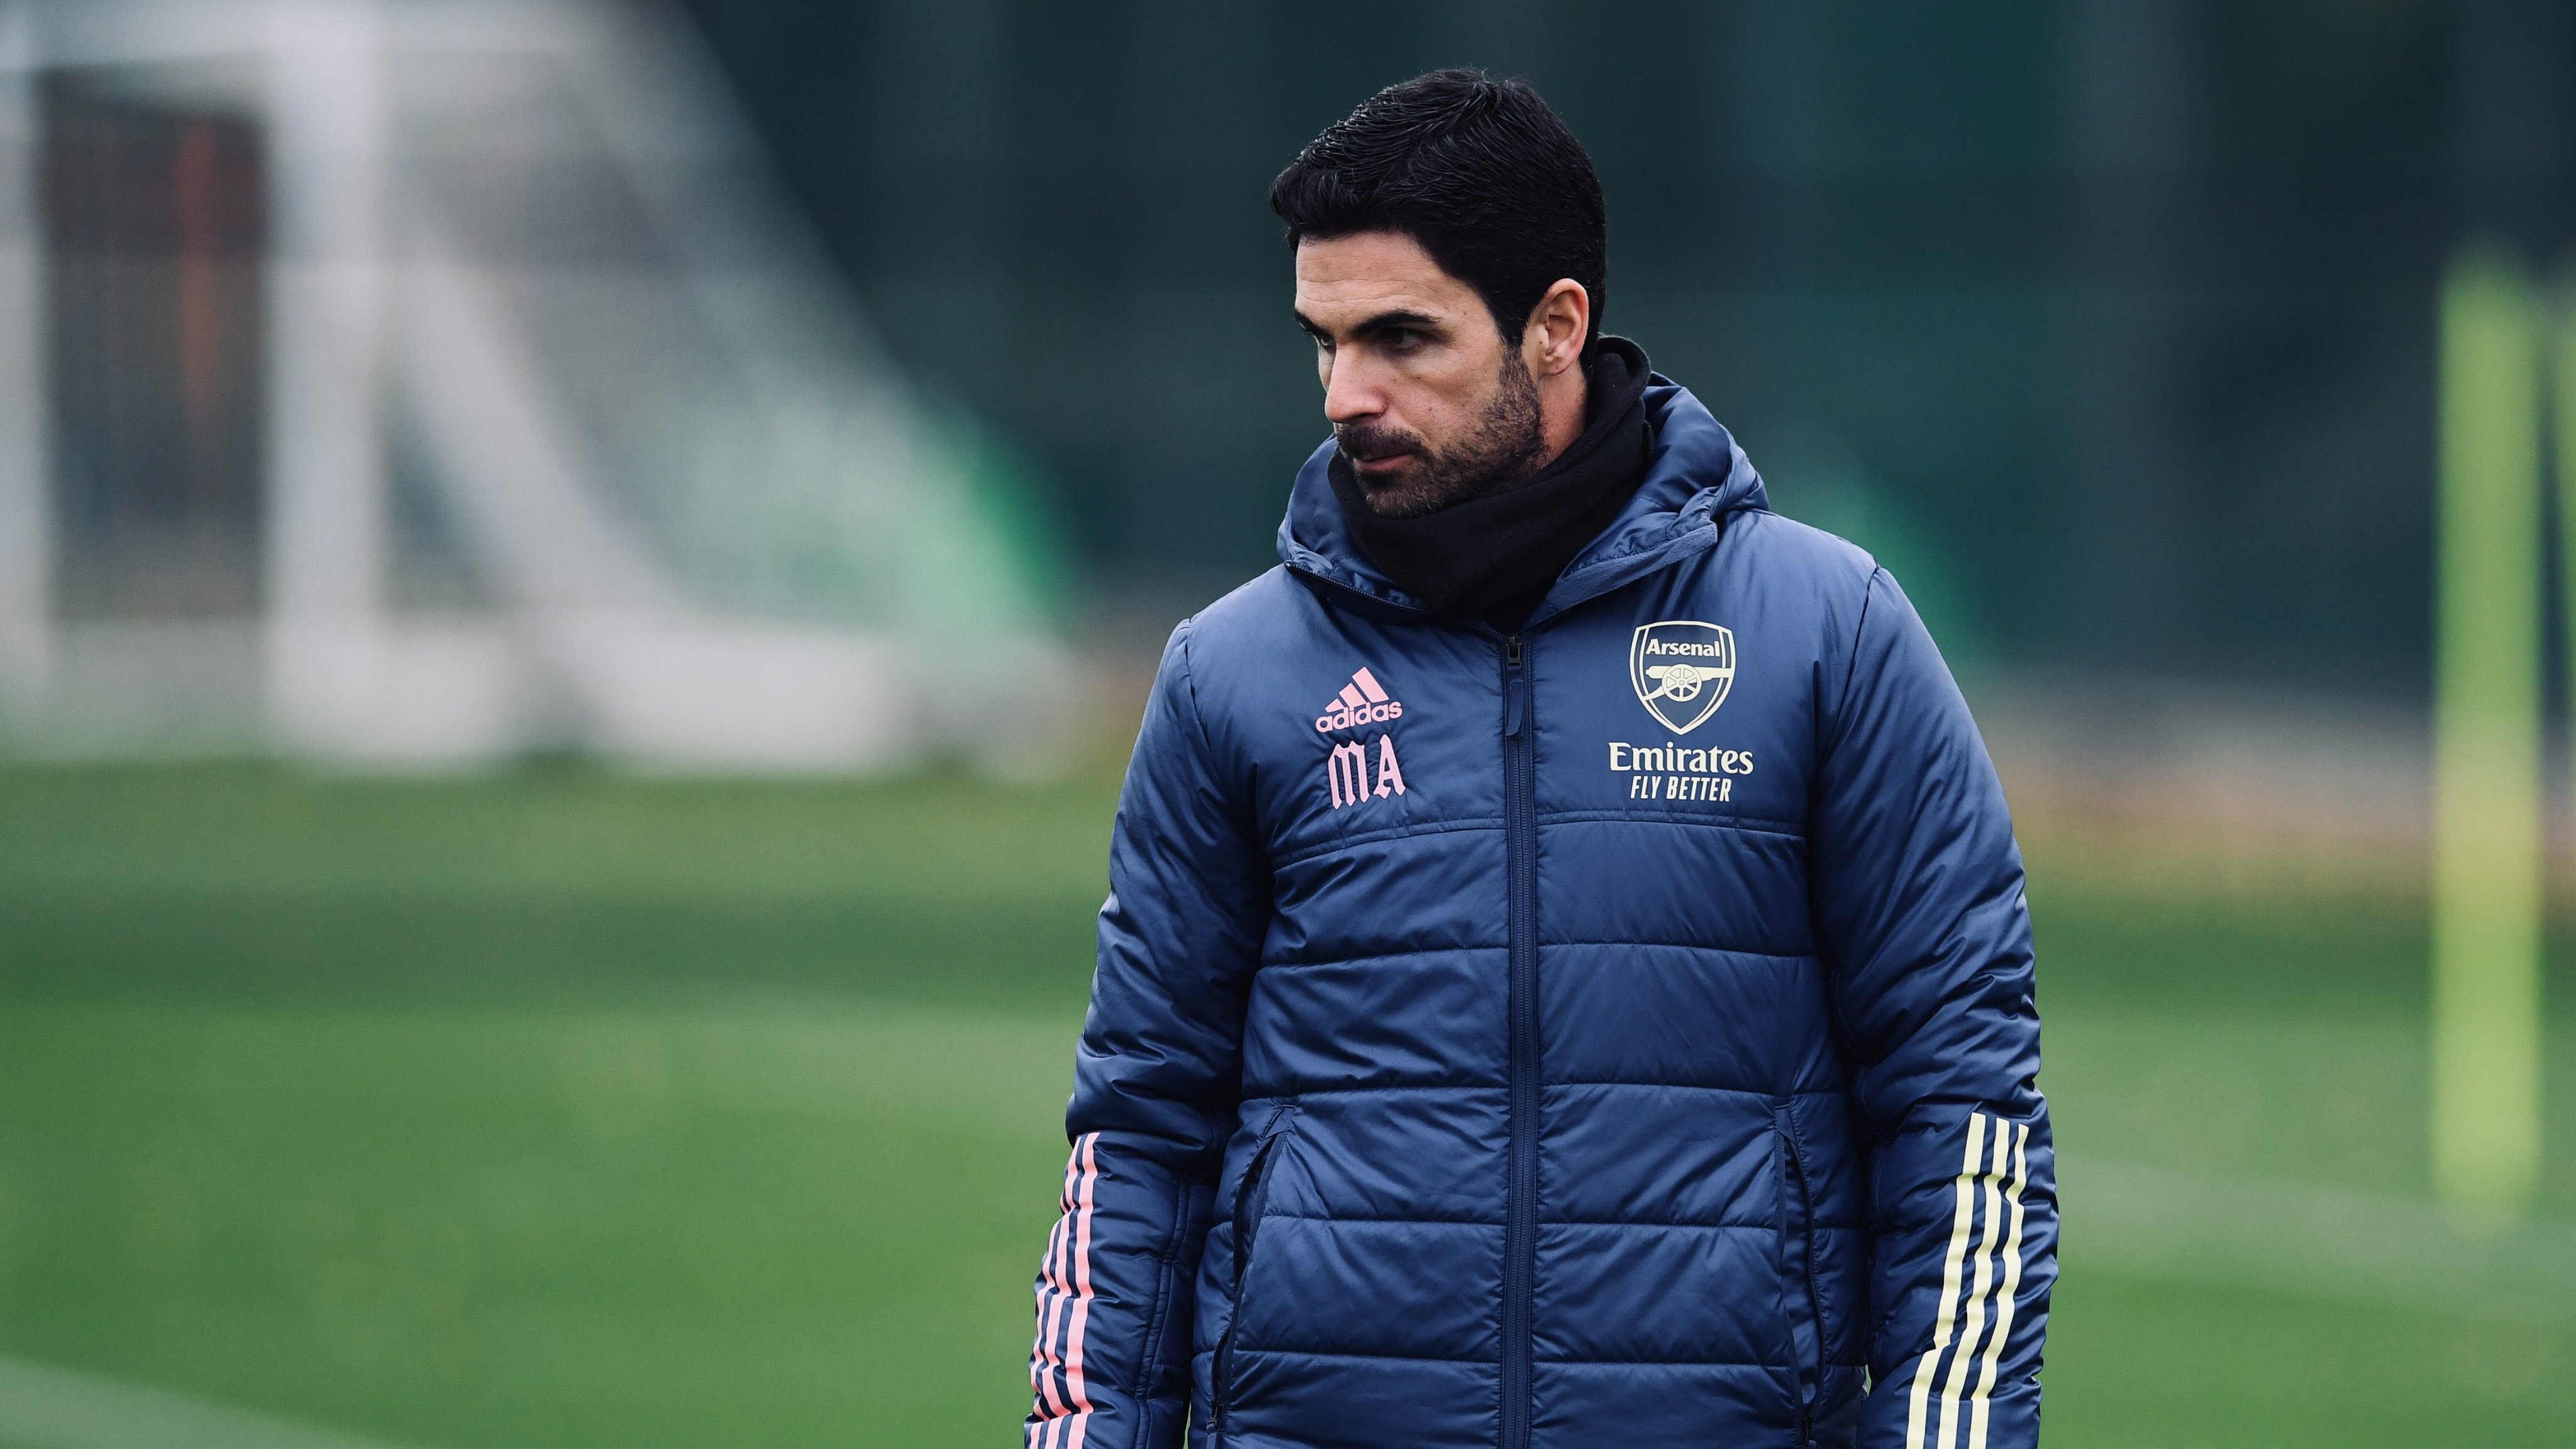 Mikel Arteta to miss Arsenal vs Manchester City after positive Covid-19 test